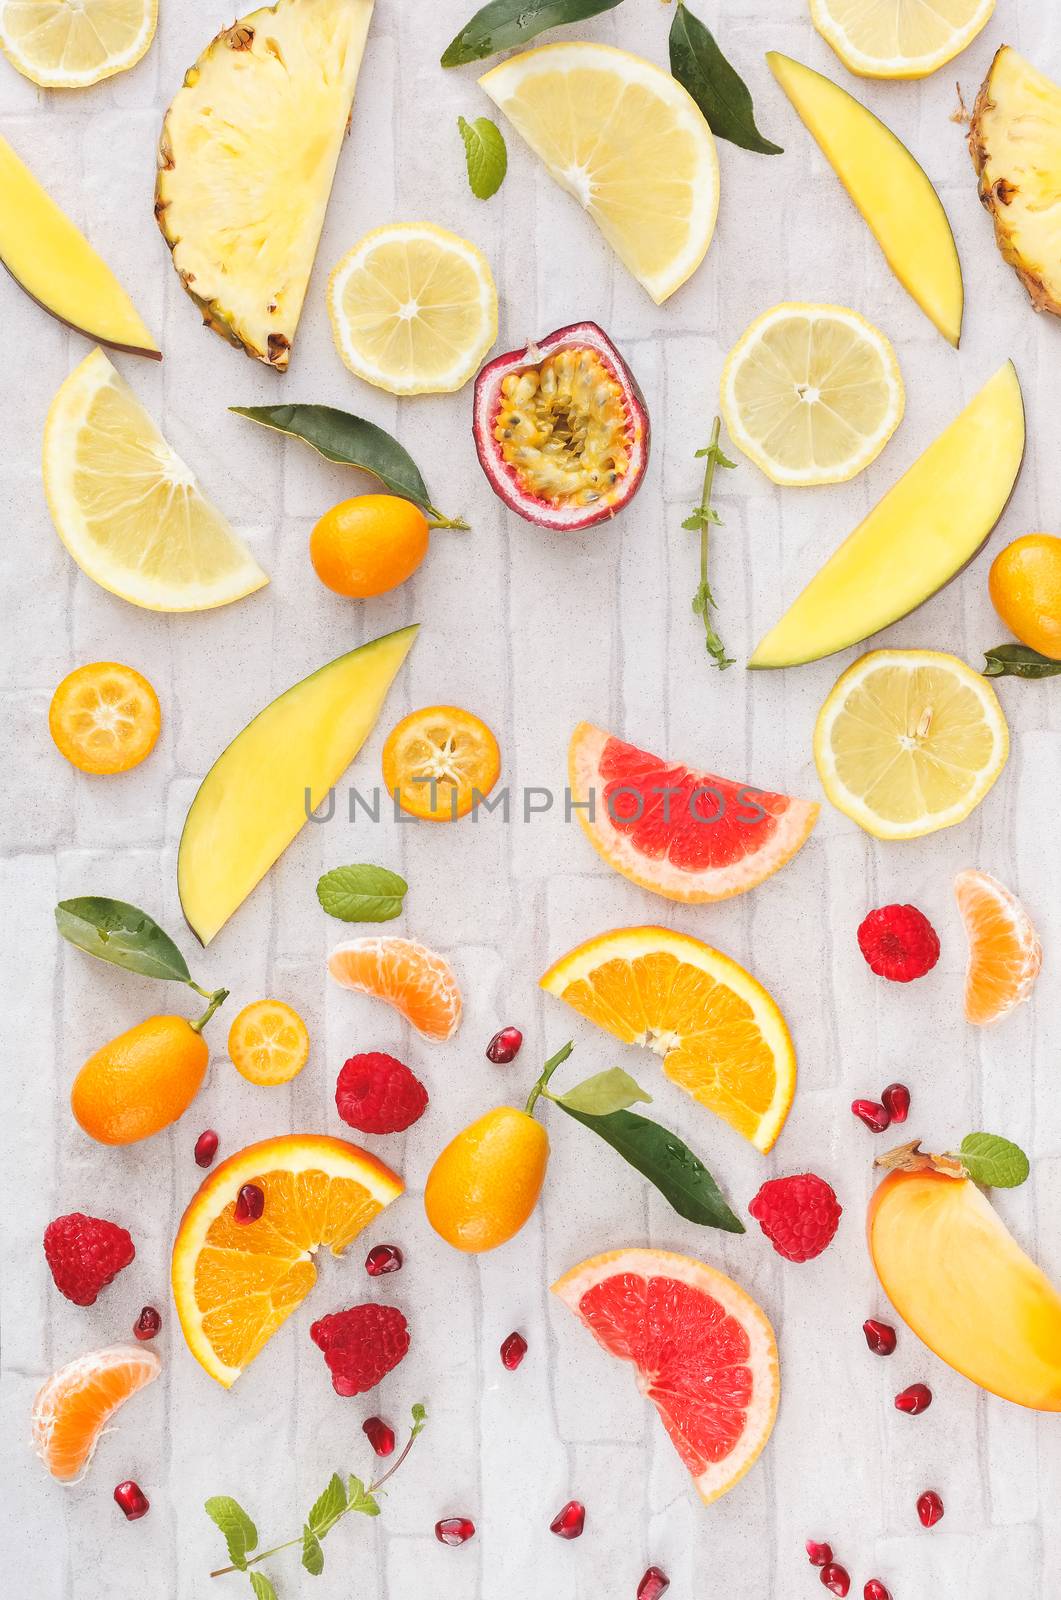 Collection of fresh whole and sliced yellow, orange and red fruits on white rustic background. Still life pattern background. Overhead view